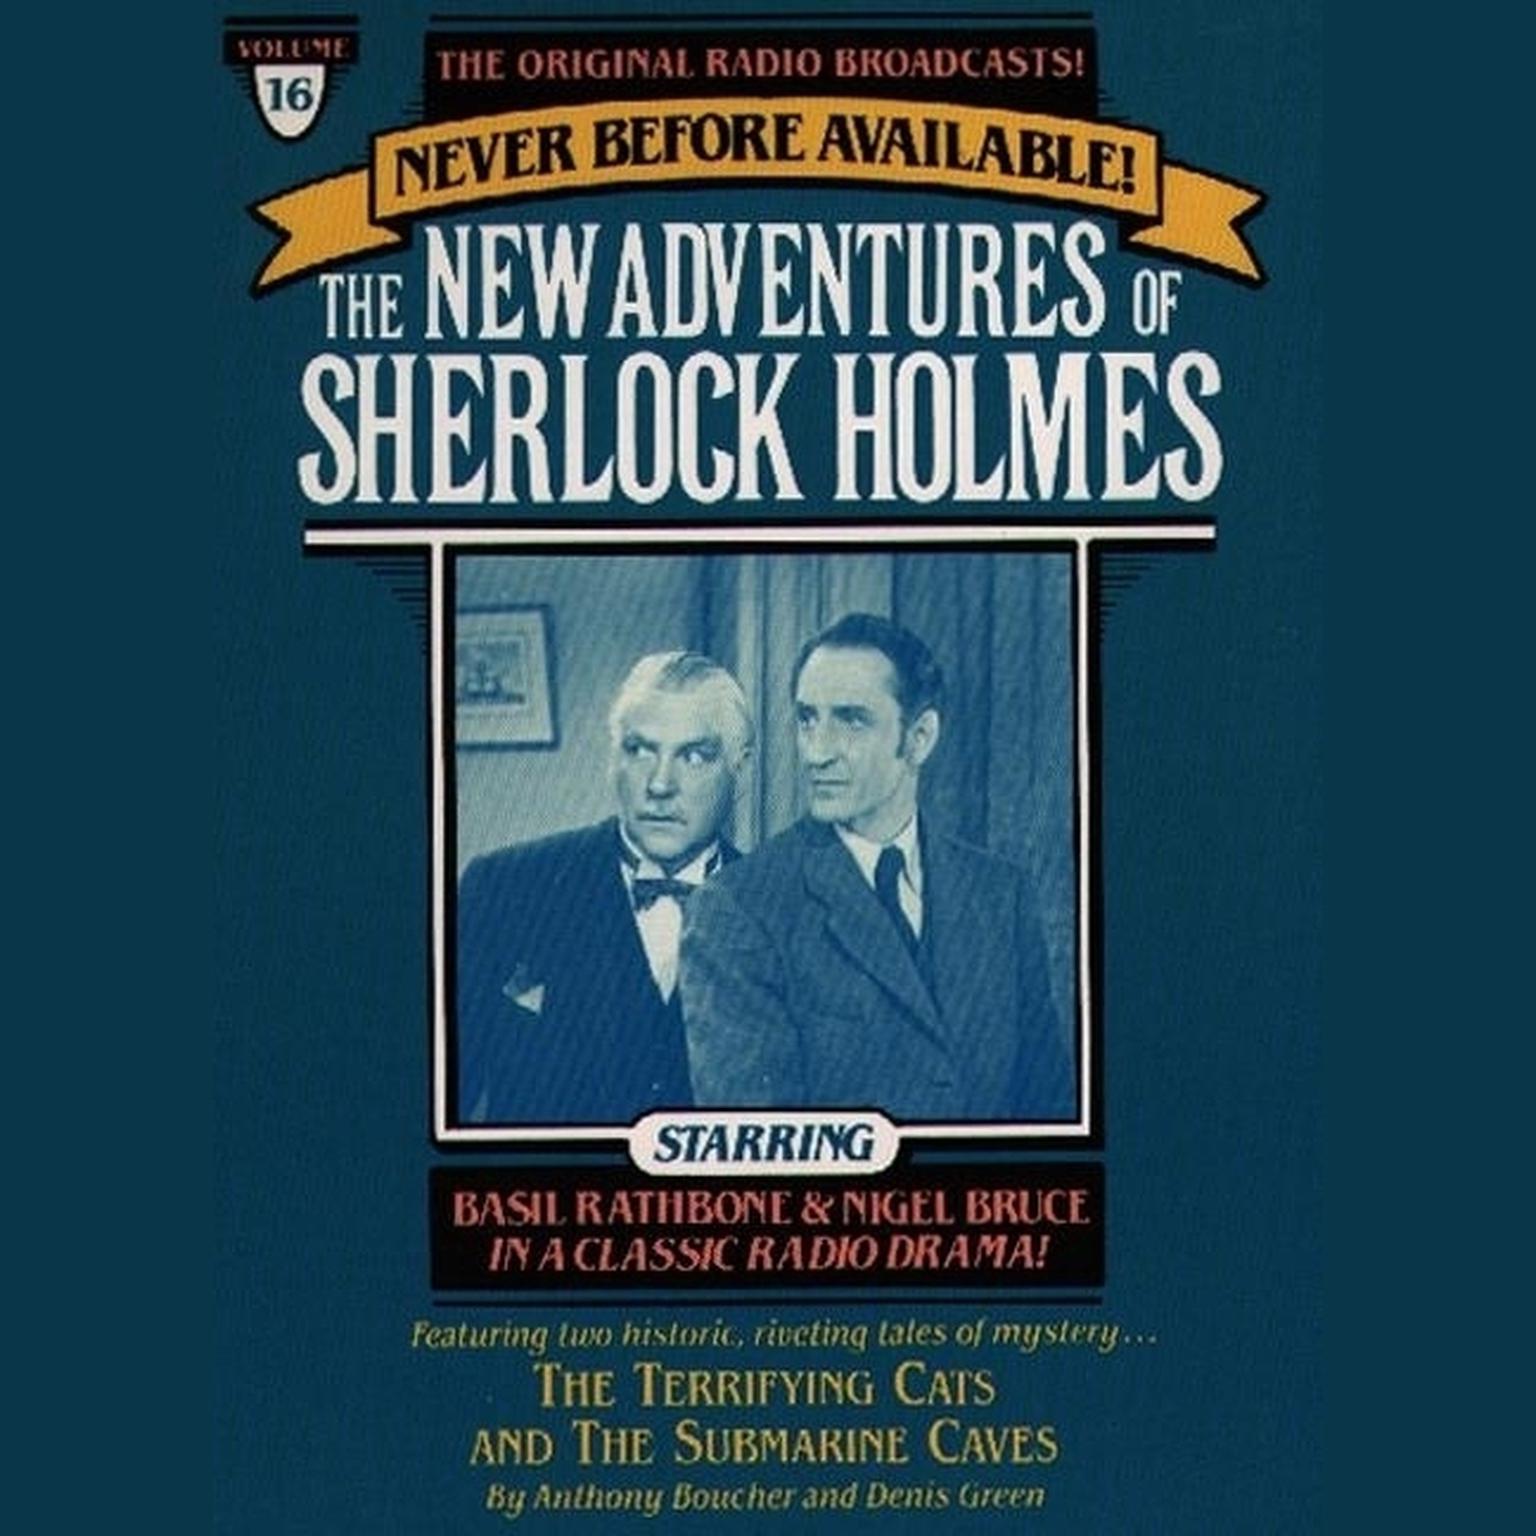 The Terrifying Cats and The Submarine Cave (Abridged): The New Adventures of Sherlock Holmes, Episode 16 Audiobook, by Anthony Boucher